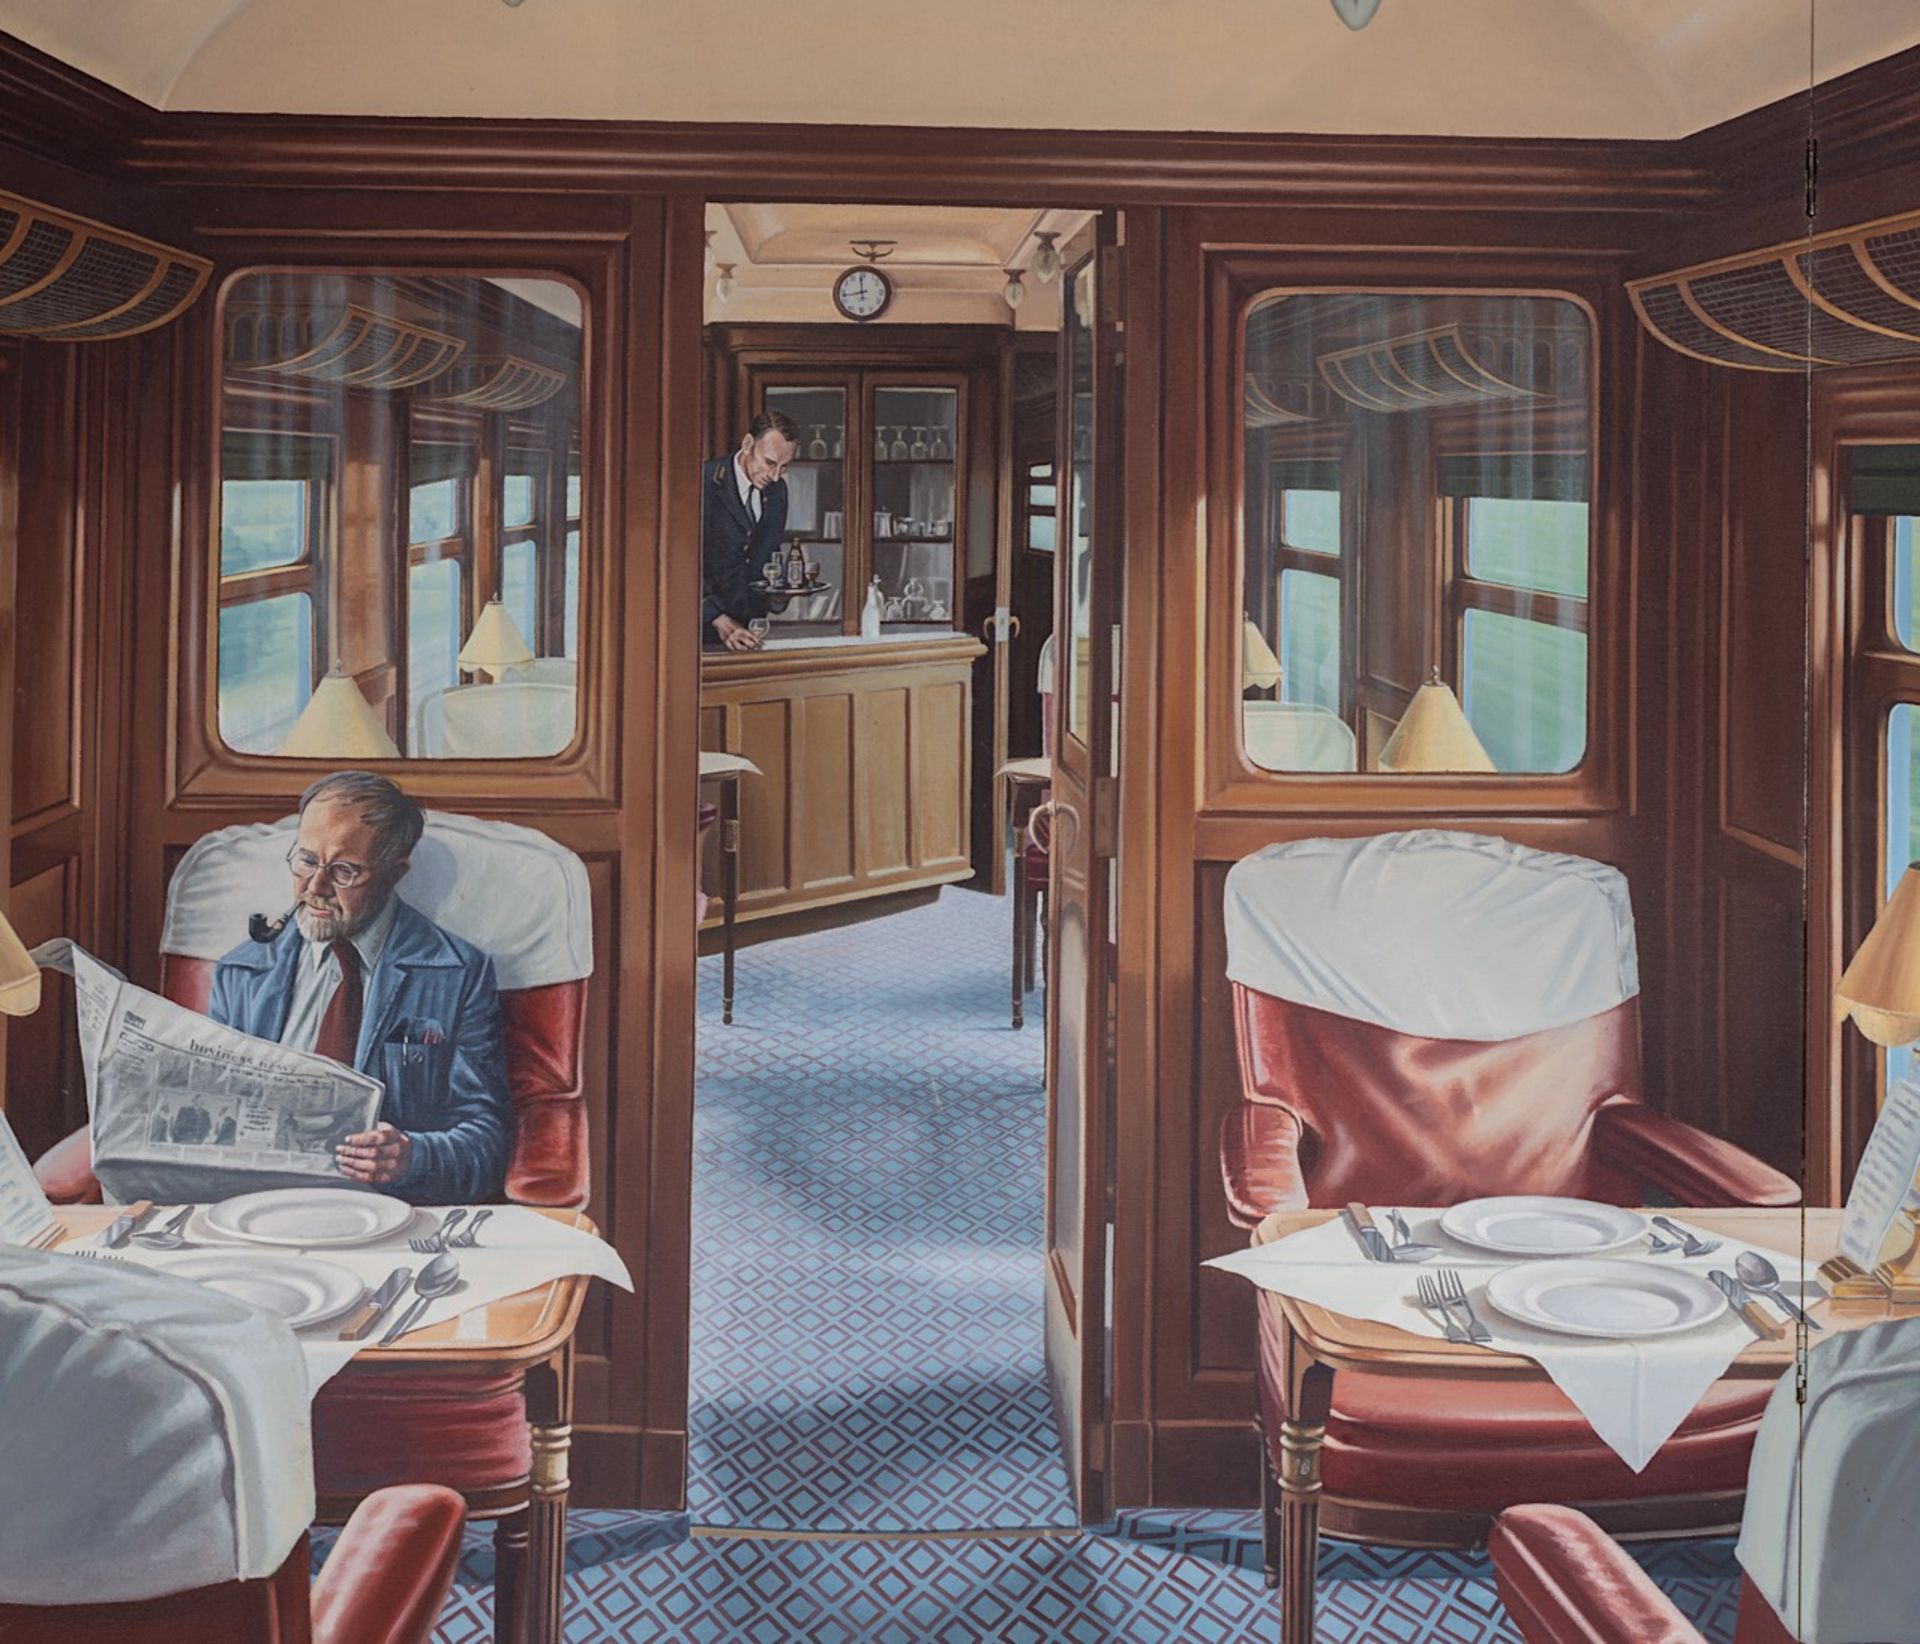 Giles Winter (1947), triptych of the interior of a train compartment, 1980, oil on canvas, 136 x 122 - Image 6 of 10